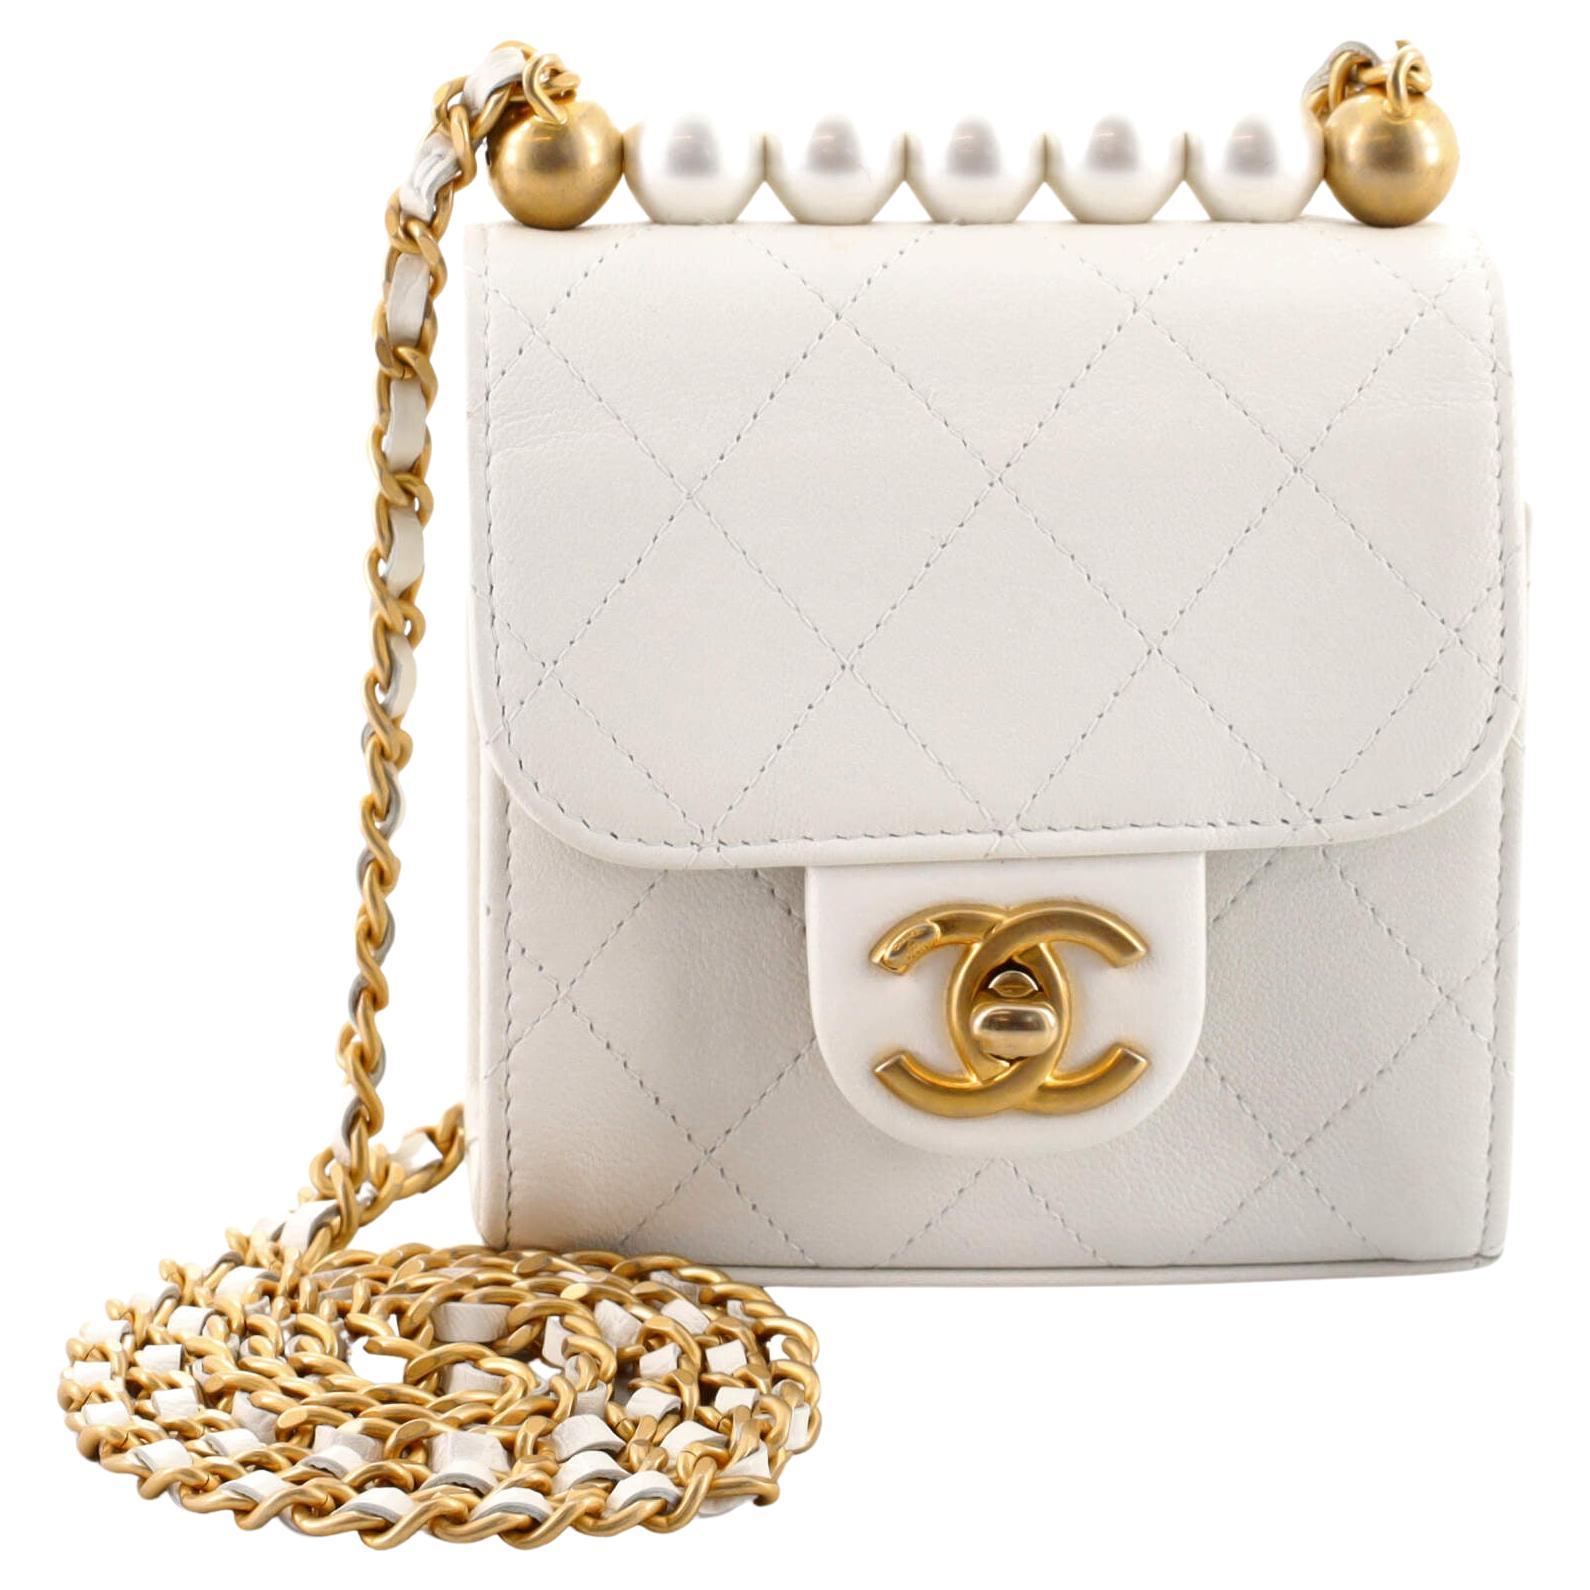 Chanel Timeless/Classic COCO 27 cm double flap bag in ecru quilted